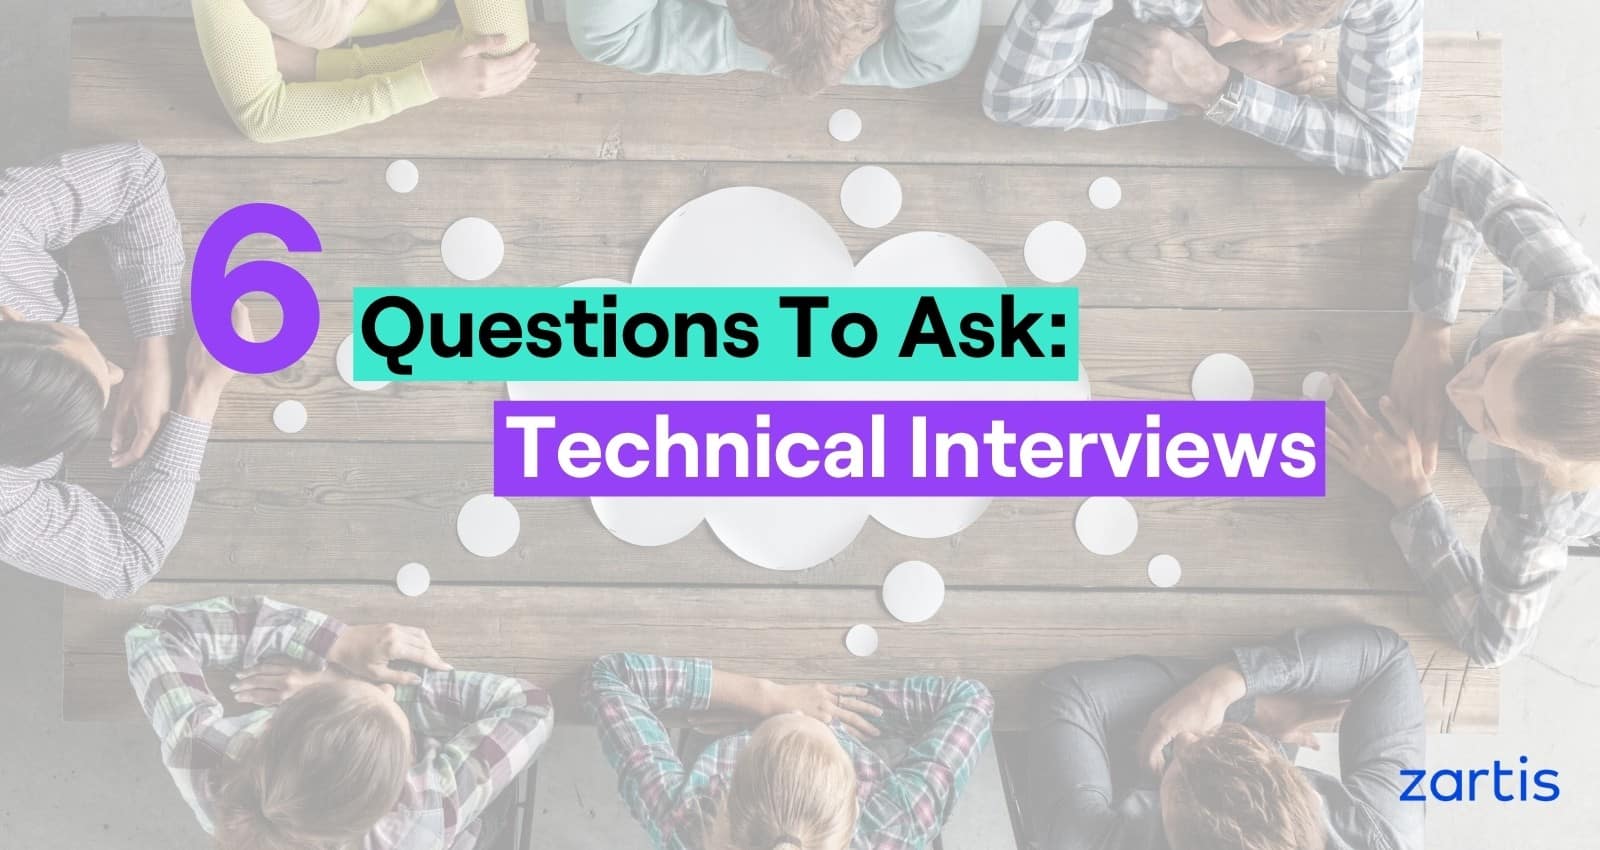 6 questions for software developers to ask the interviewers at the end of technical interviews